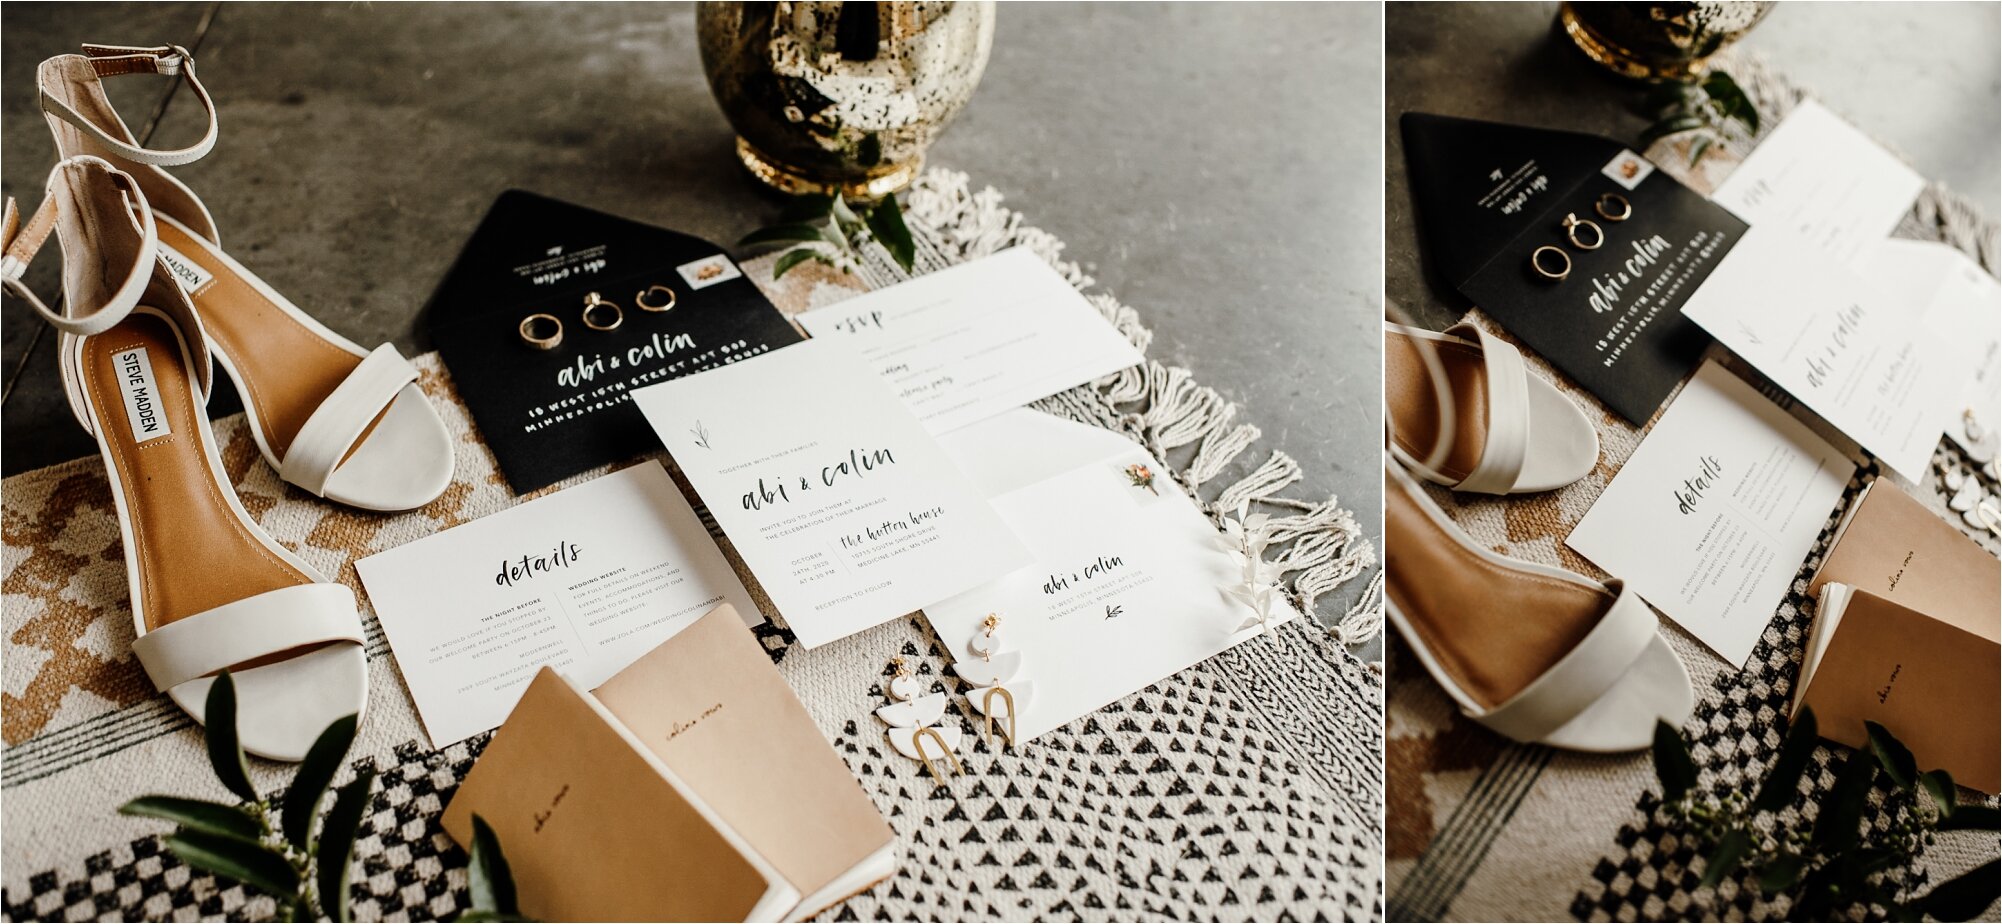  wedding invitation suite by grace niu design for abi and colin stationary 